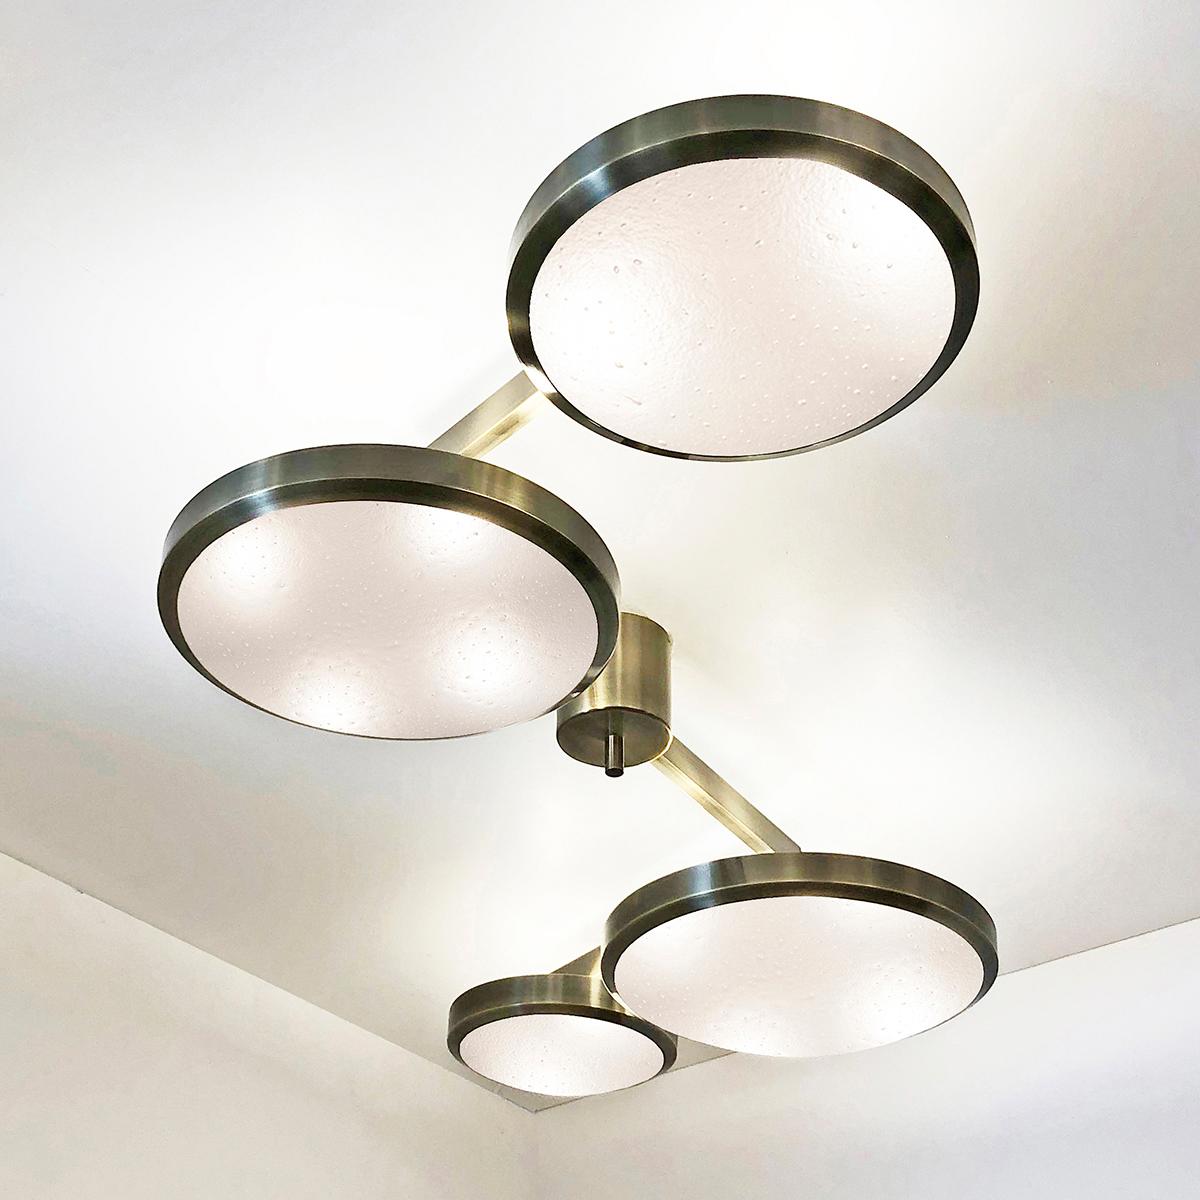 The Quattro ceiling light plays with the notion of lines and shapes, bringing the concept to life with its distinctive winding frame with four variable size shades at staggered heights. The first images show the fixture in our bronzo ottone (bronze)